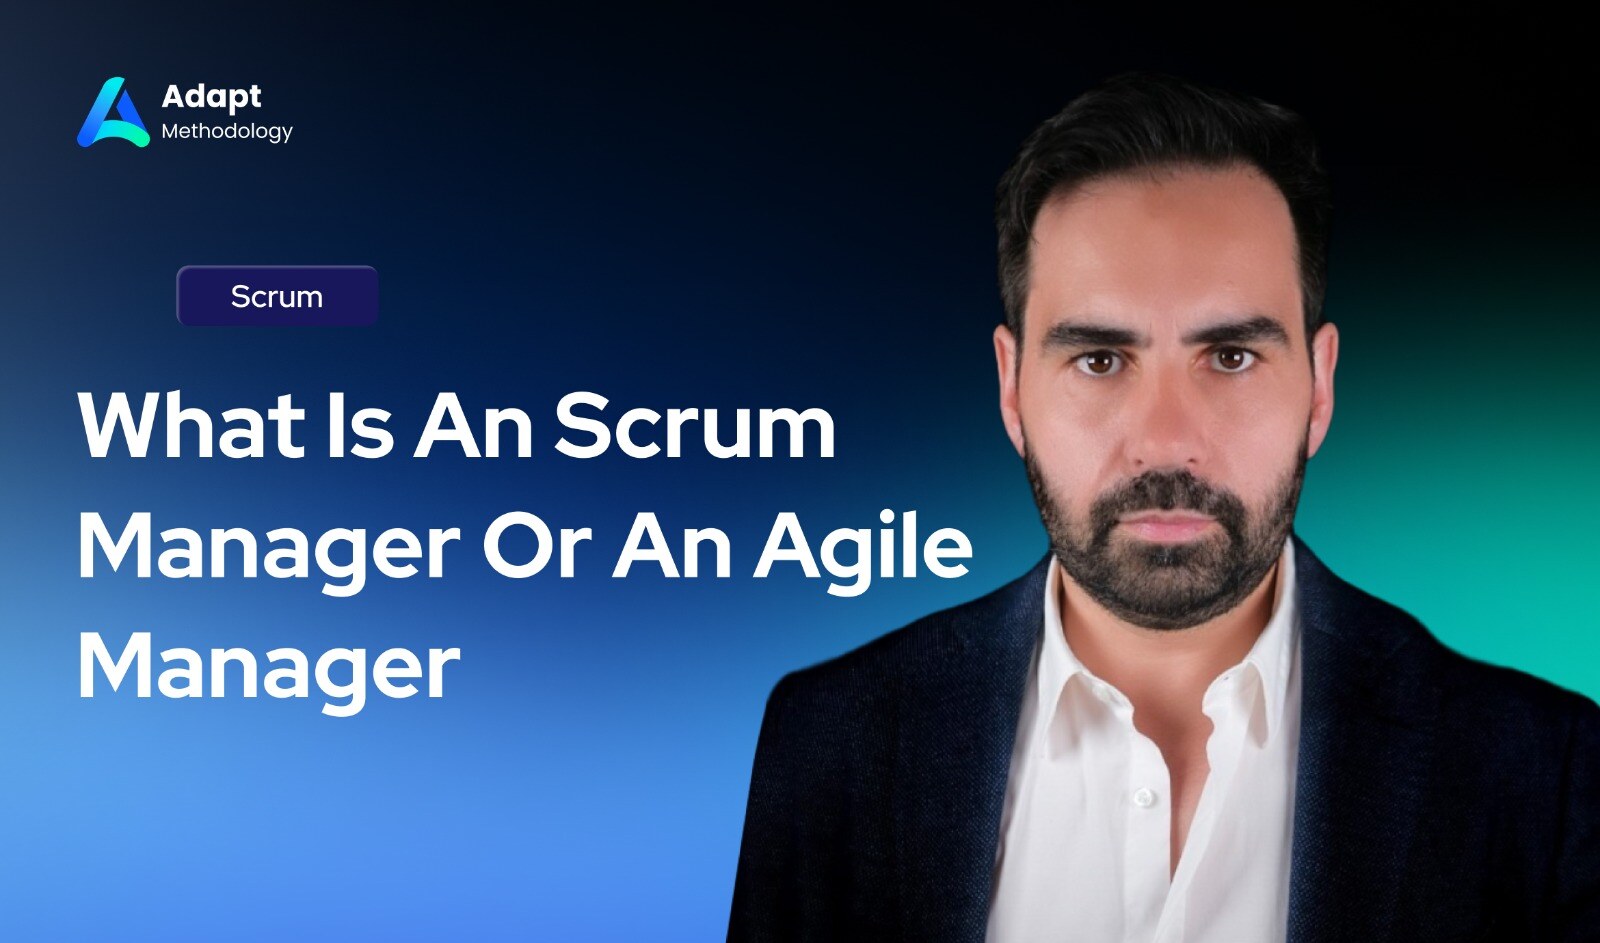 Scrum Manager Or An Agile Manager